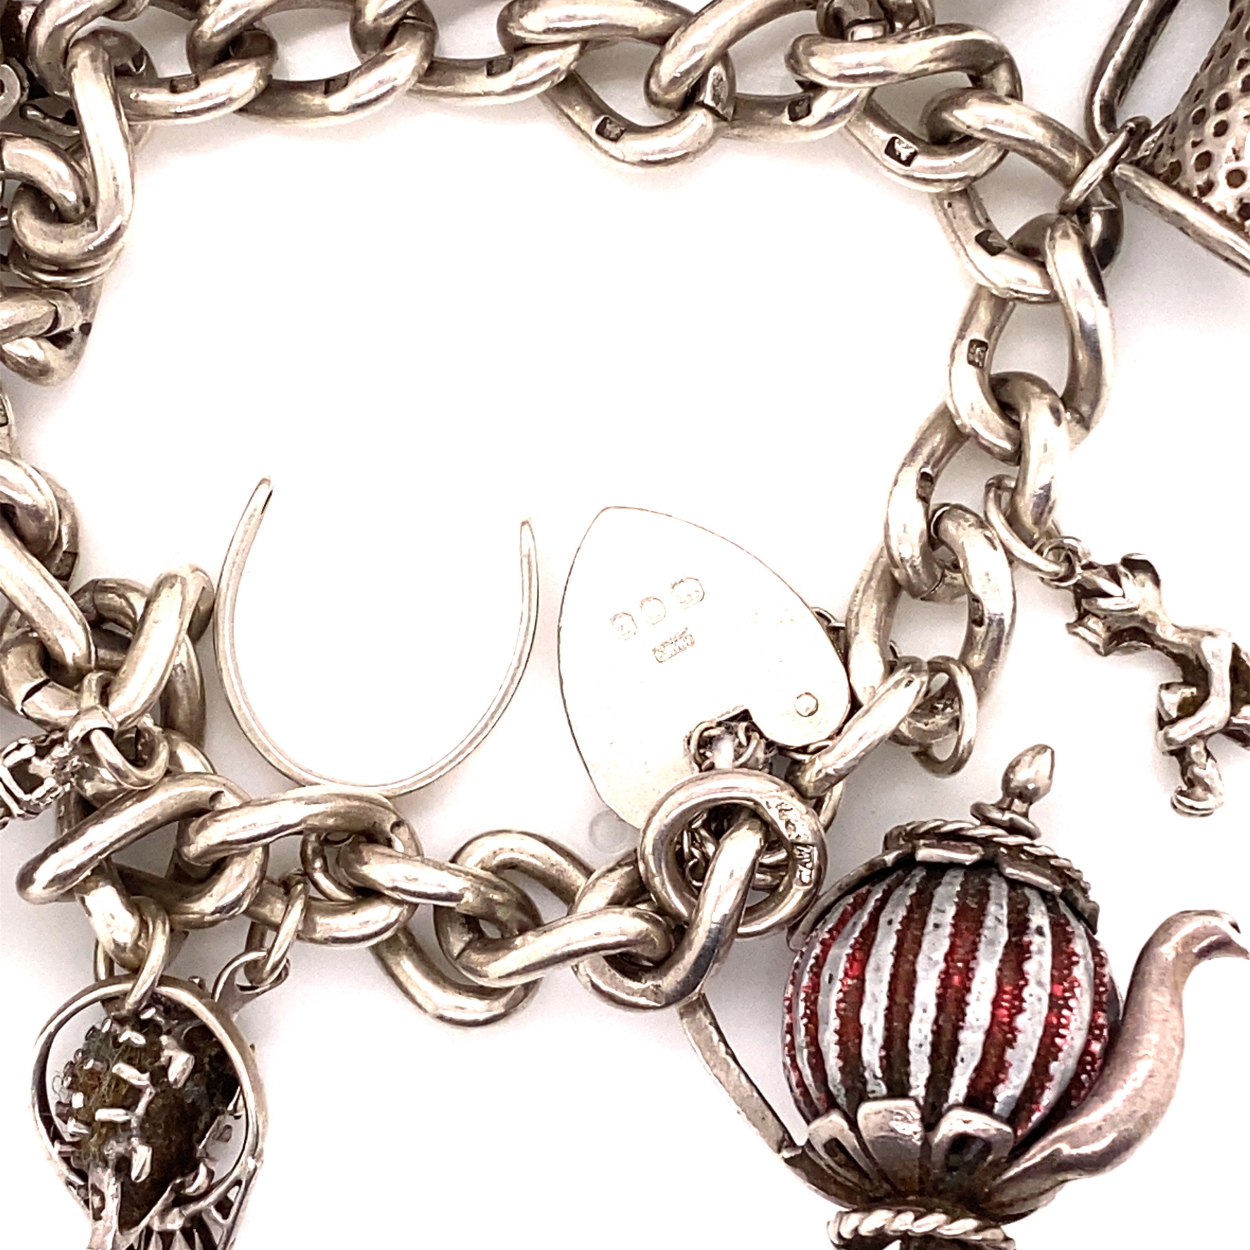 A HALLMARKED SILVER VINTAGE CHARM BRACELET, COMPLETE WITH AN ASSORTMENT OF SILVER CHARMS, AN - Image 2 of 2